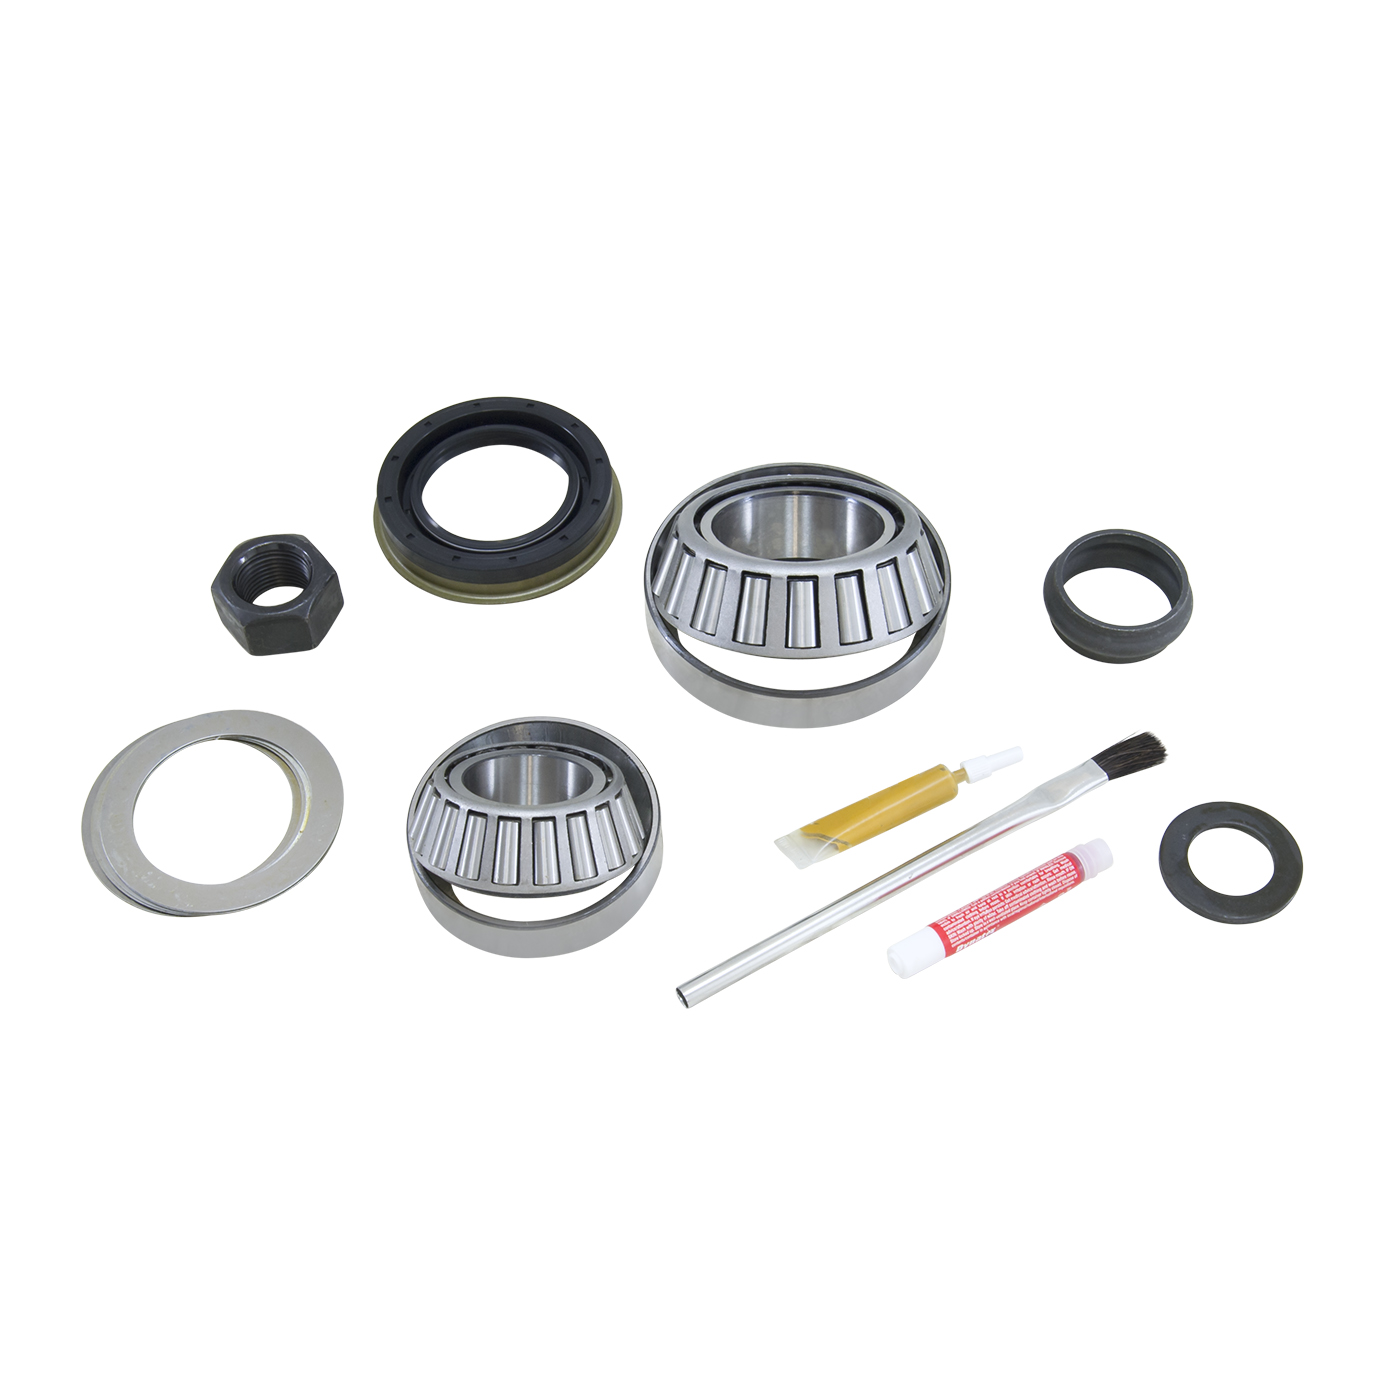 Pinion Install Kit For Dana 44 Differential